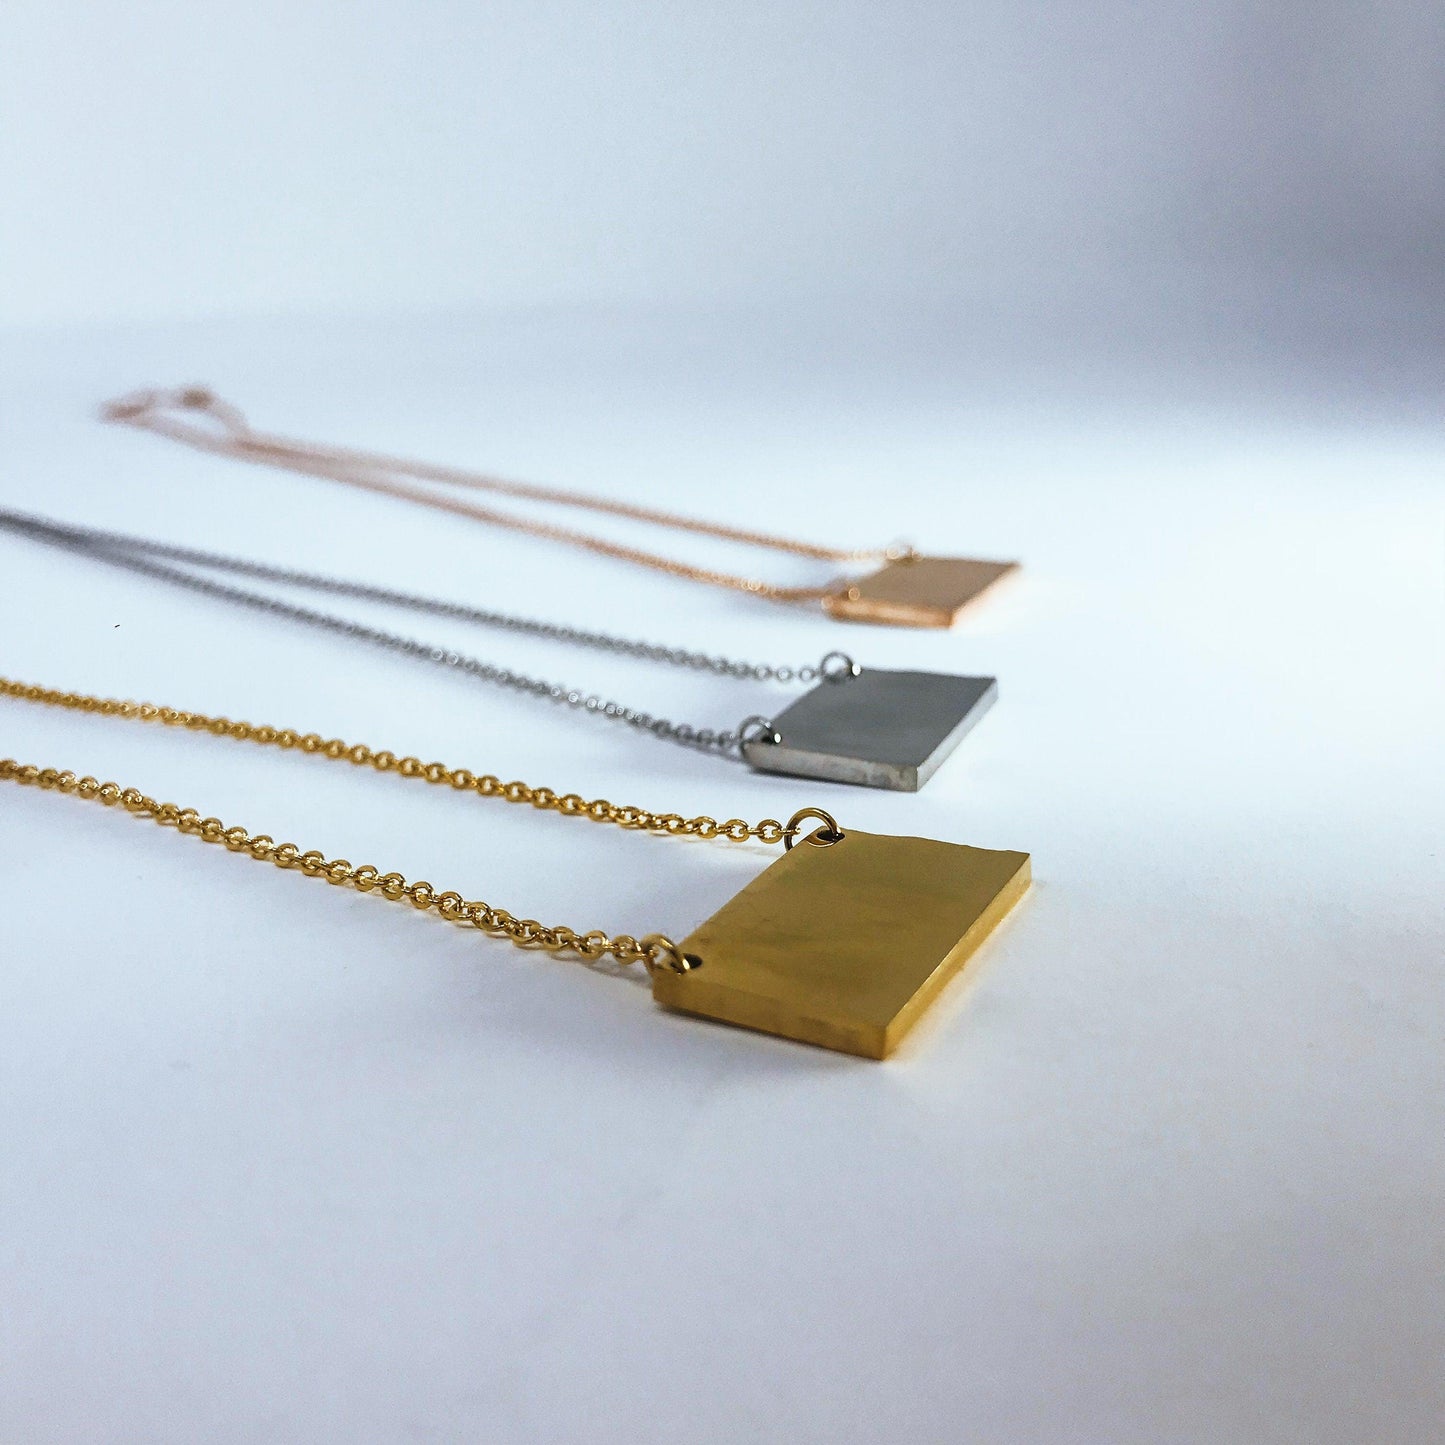 North Dakota State Silhouette Necklaces in 3 different colors: Gold, Silver & Rose Gold